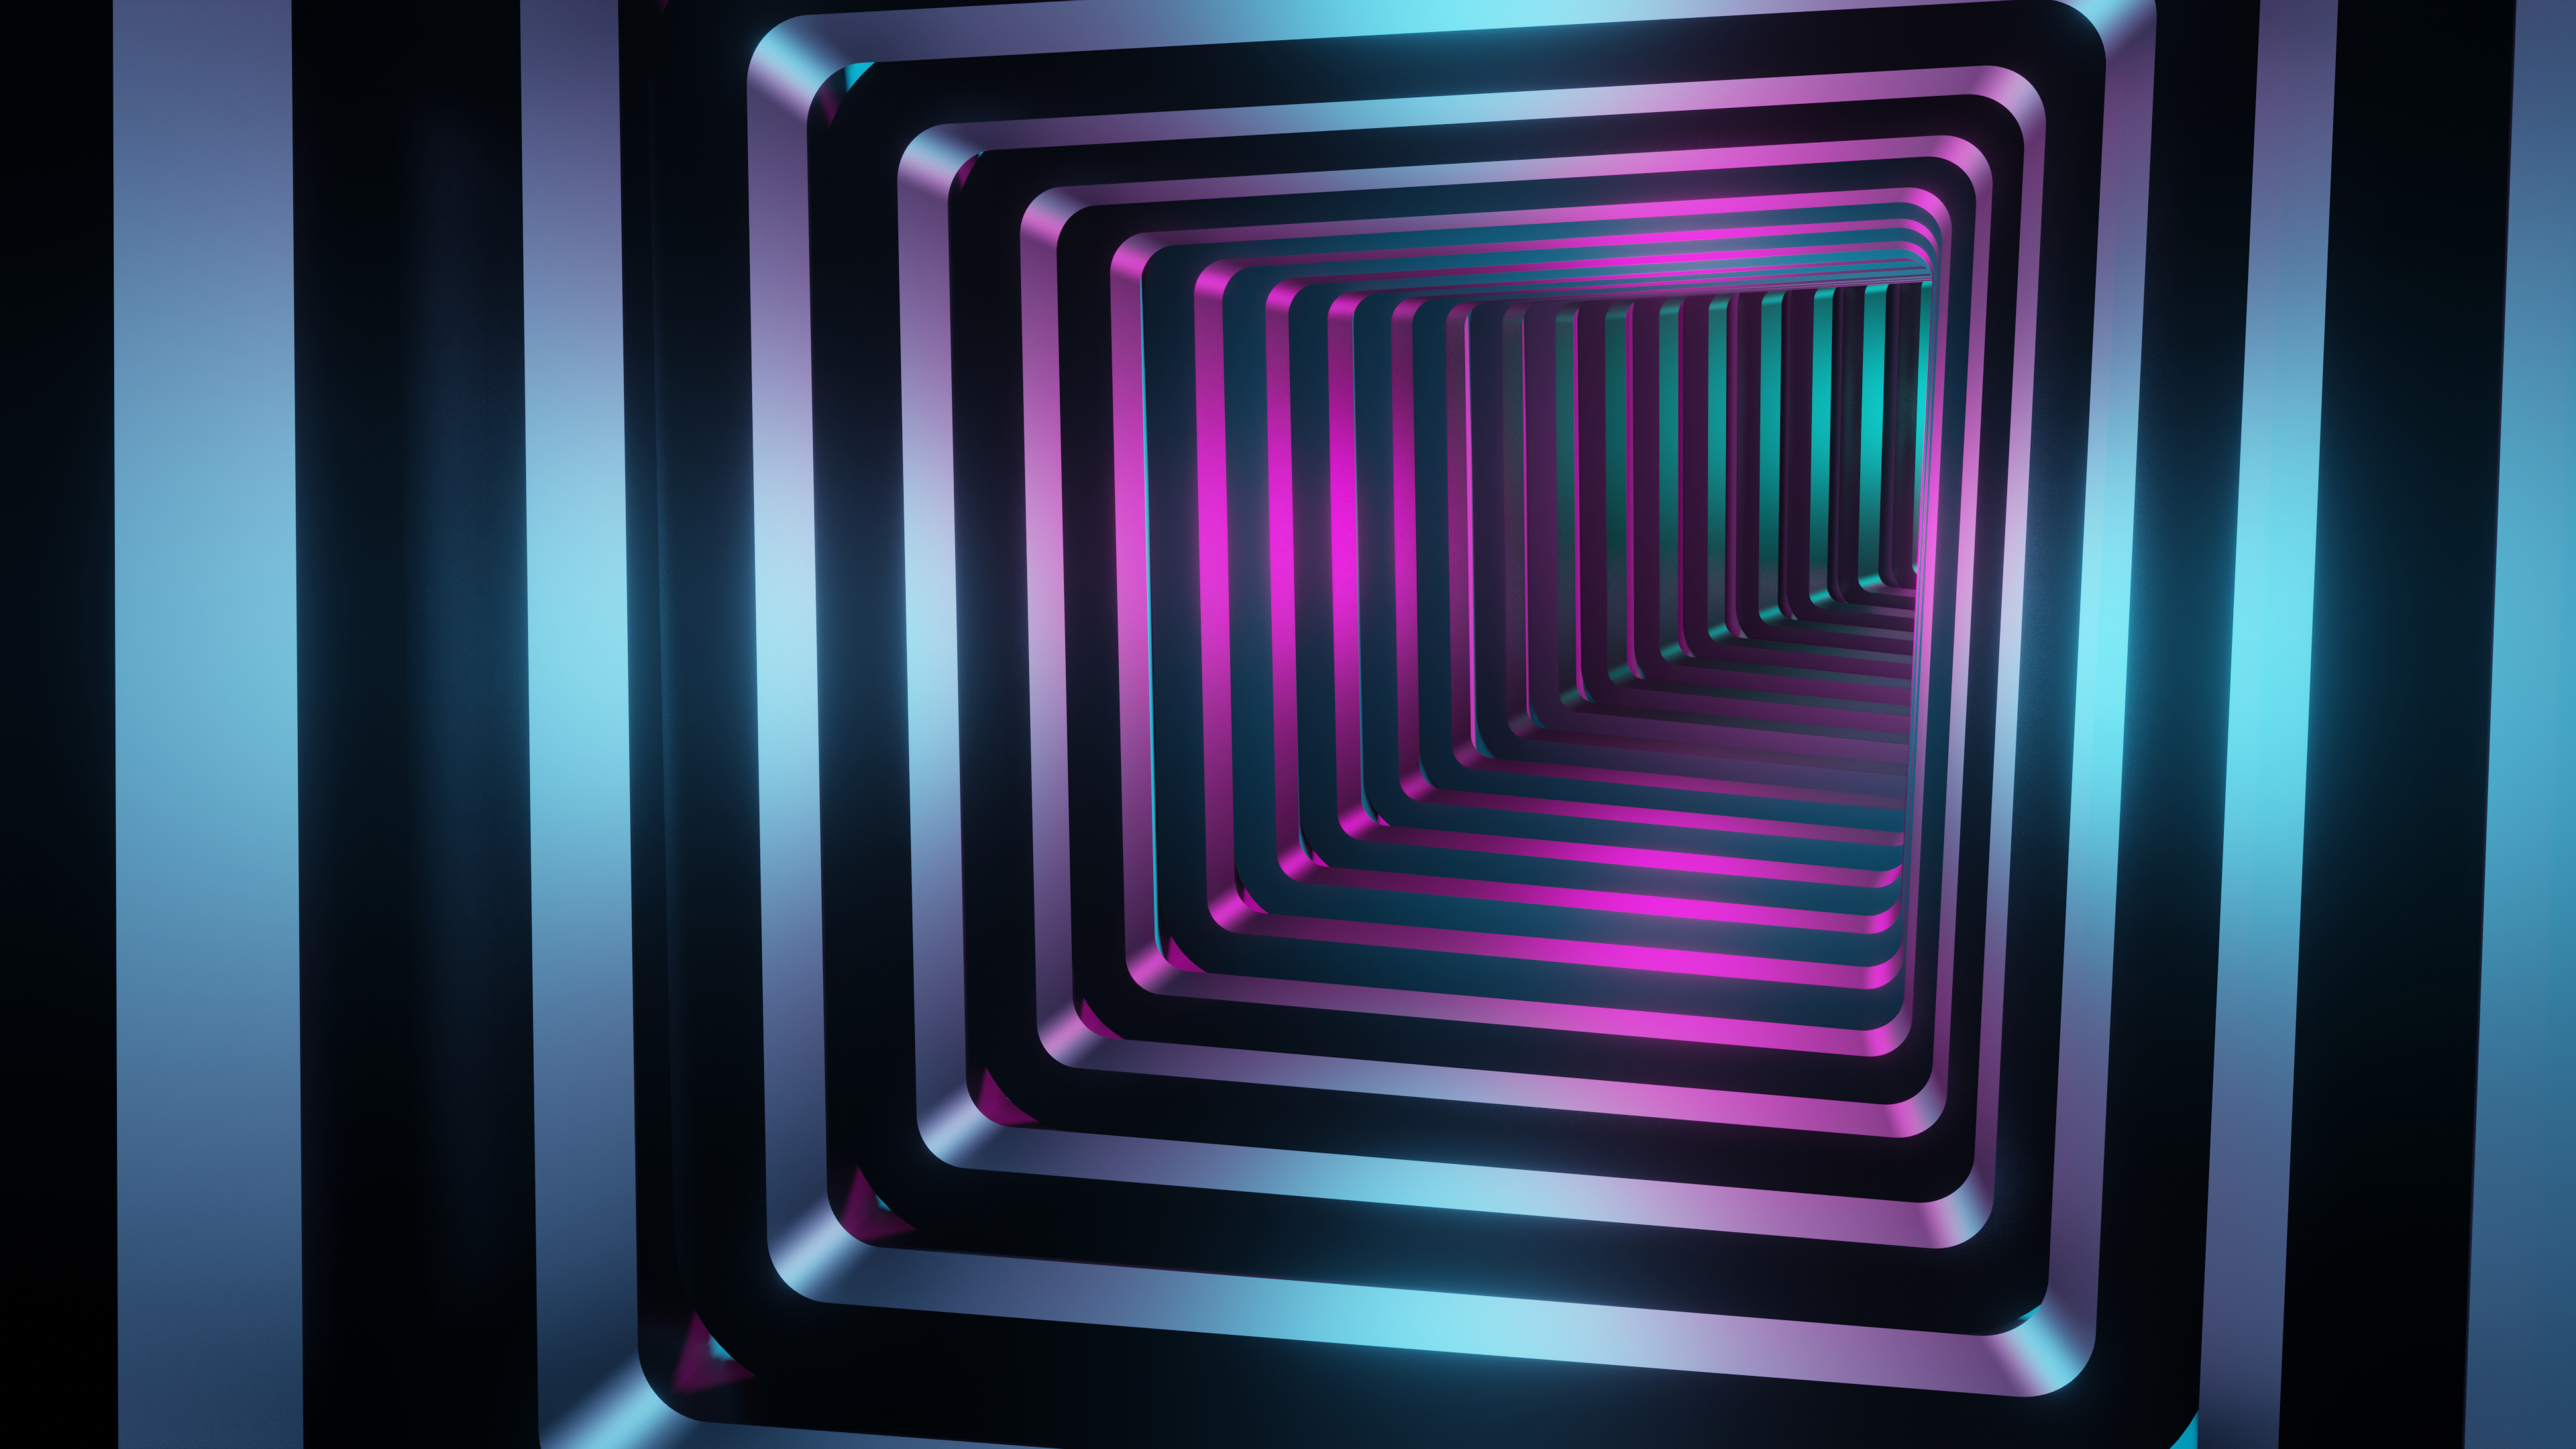 Square 3D Tunnel Wallpaper, HD Abstract 4K Wallpapers, Images, Photos